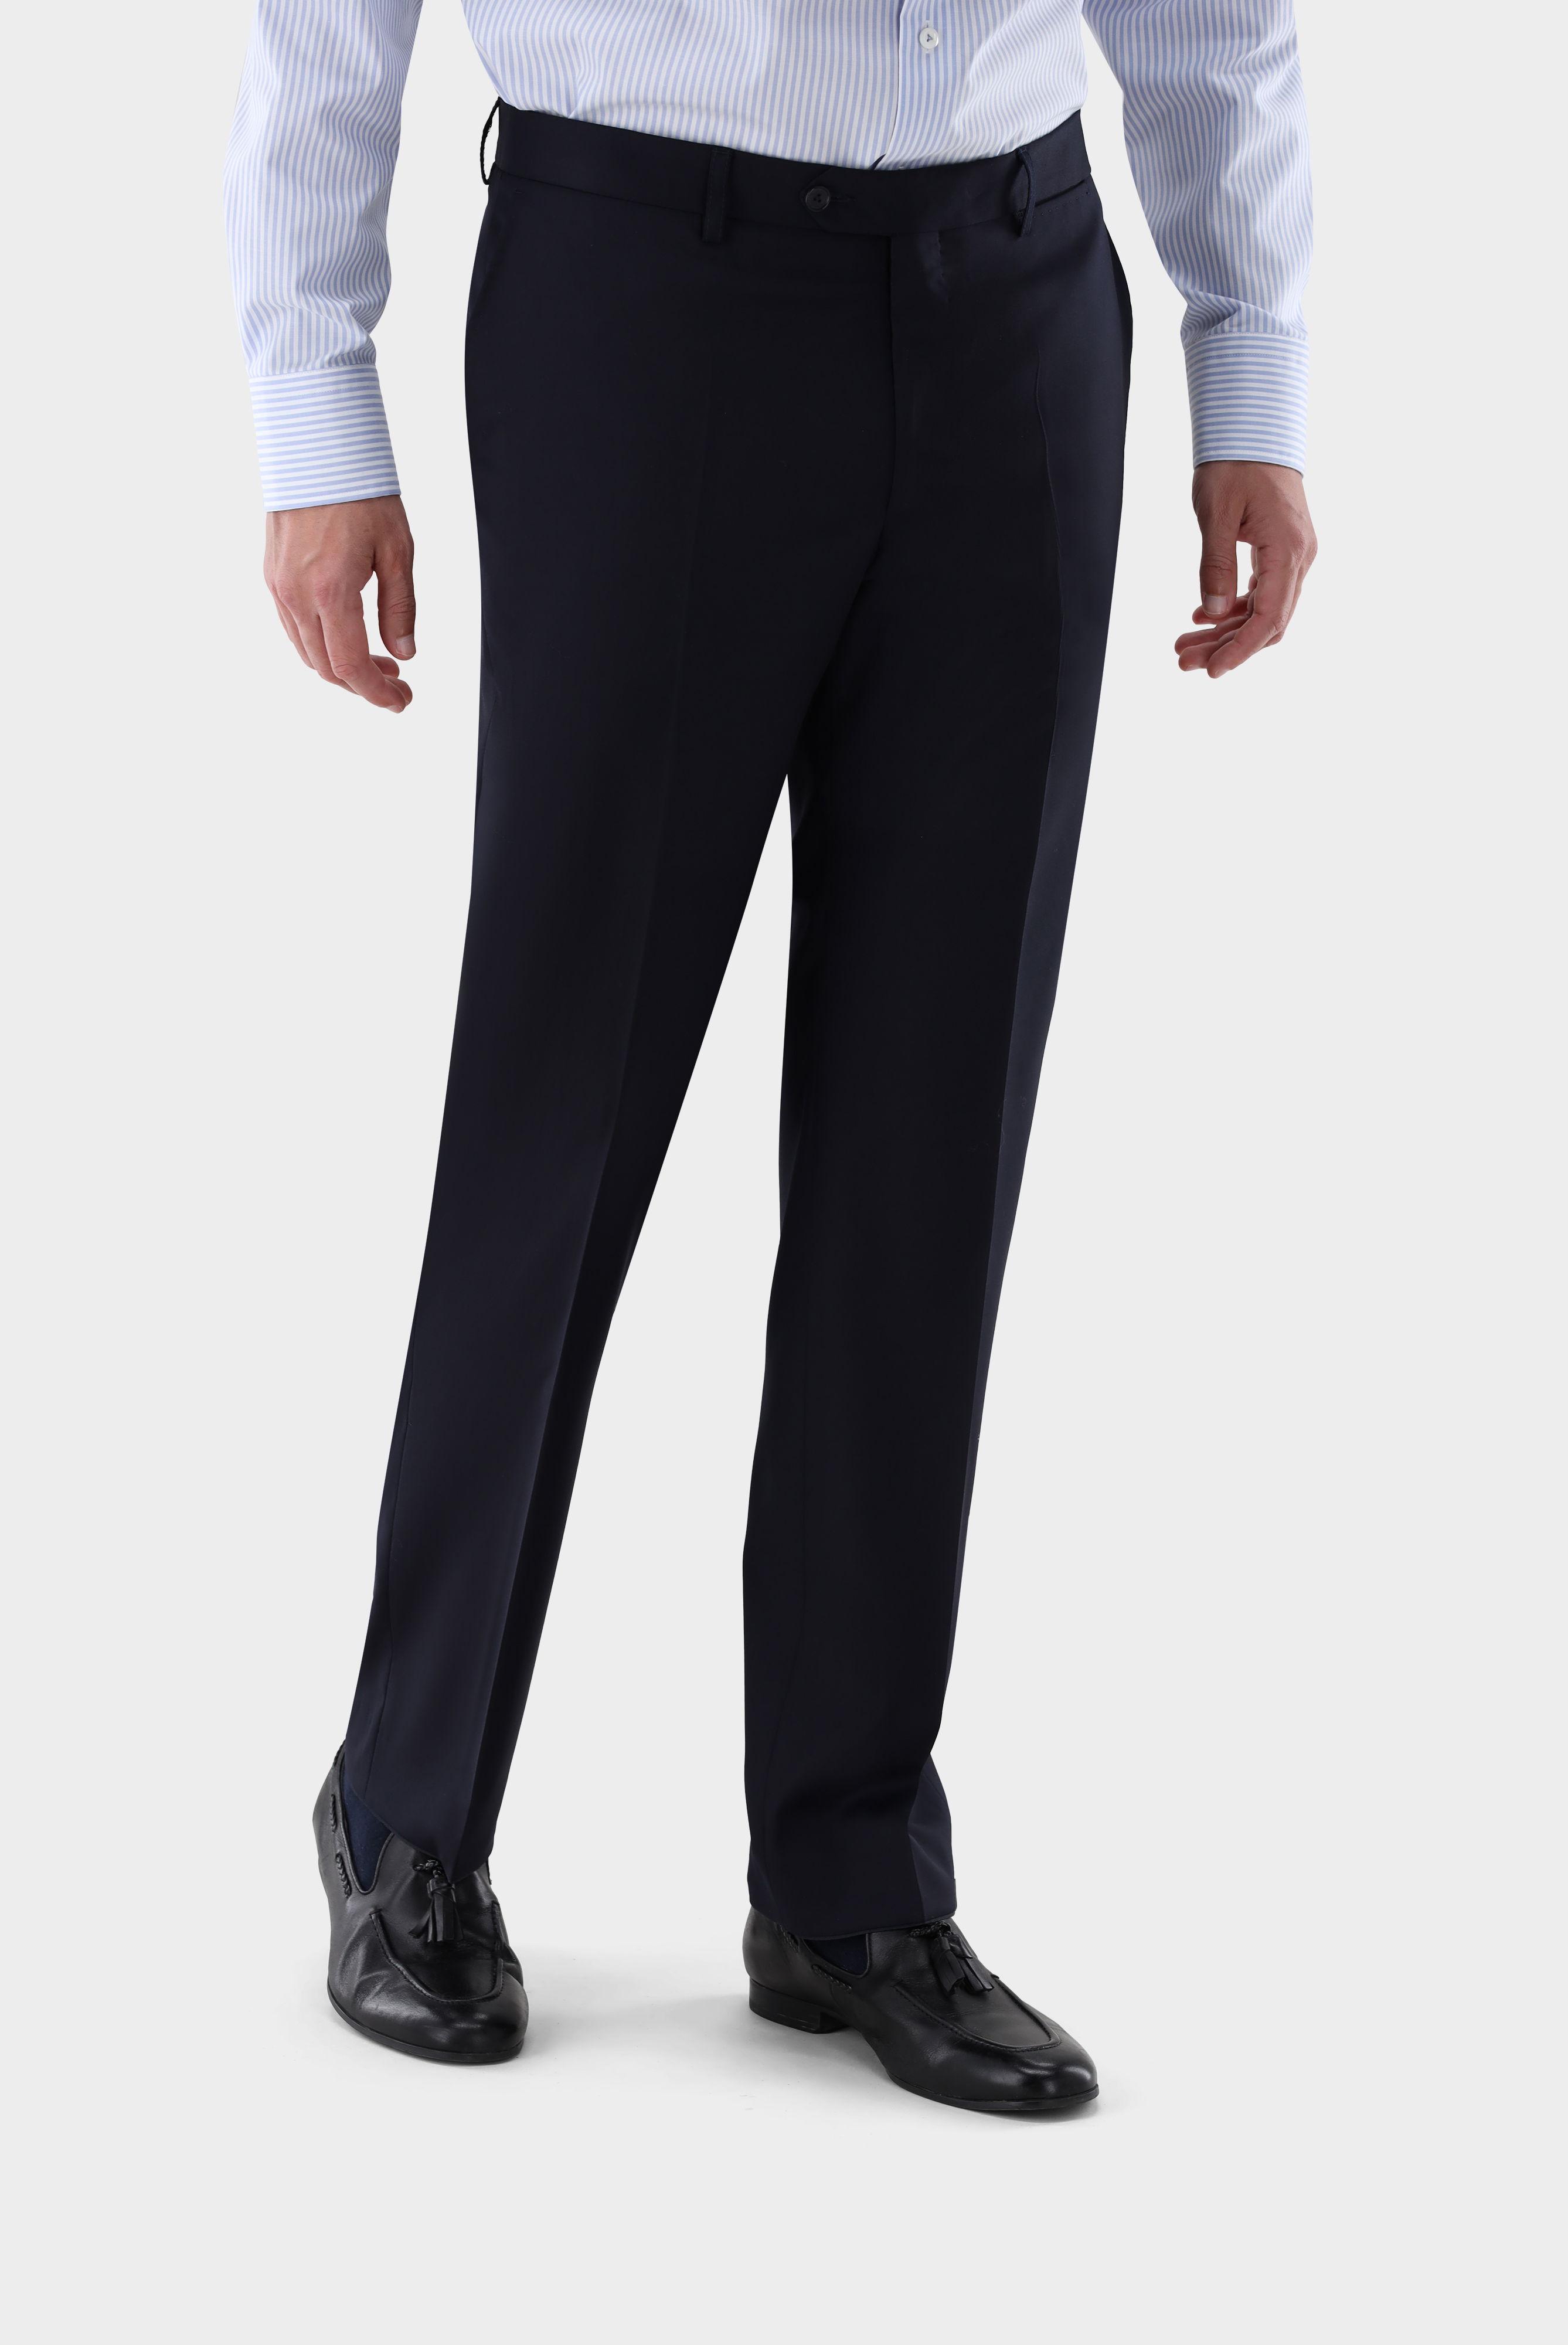 Jeans & Trousers+Men''s pants made of merino wool+80.7804.16.H01000.780.48